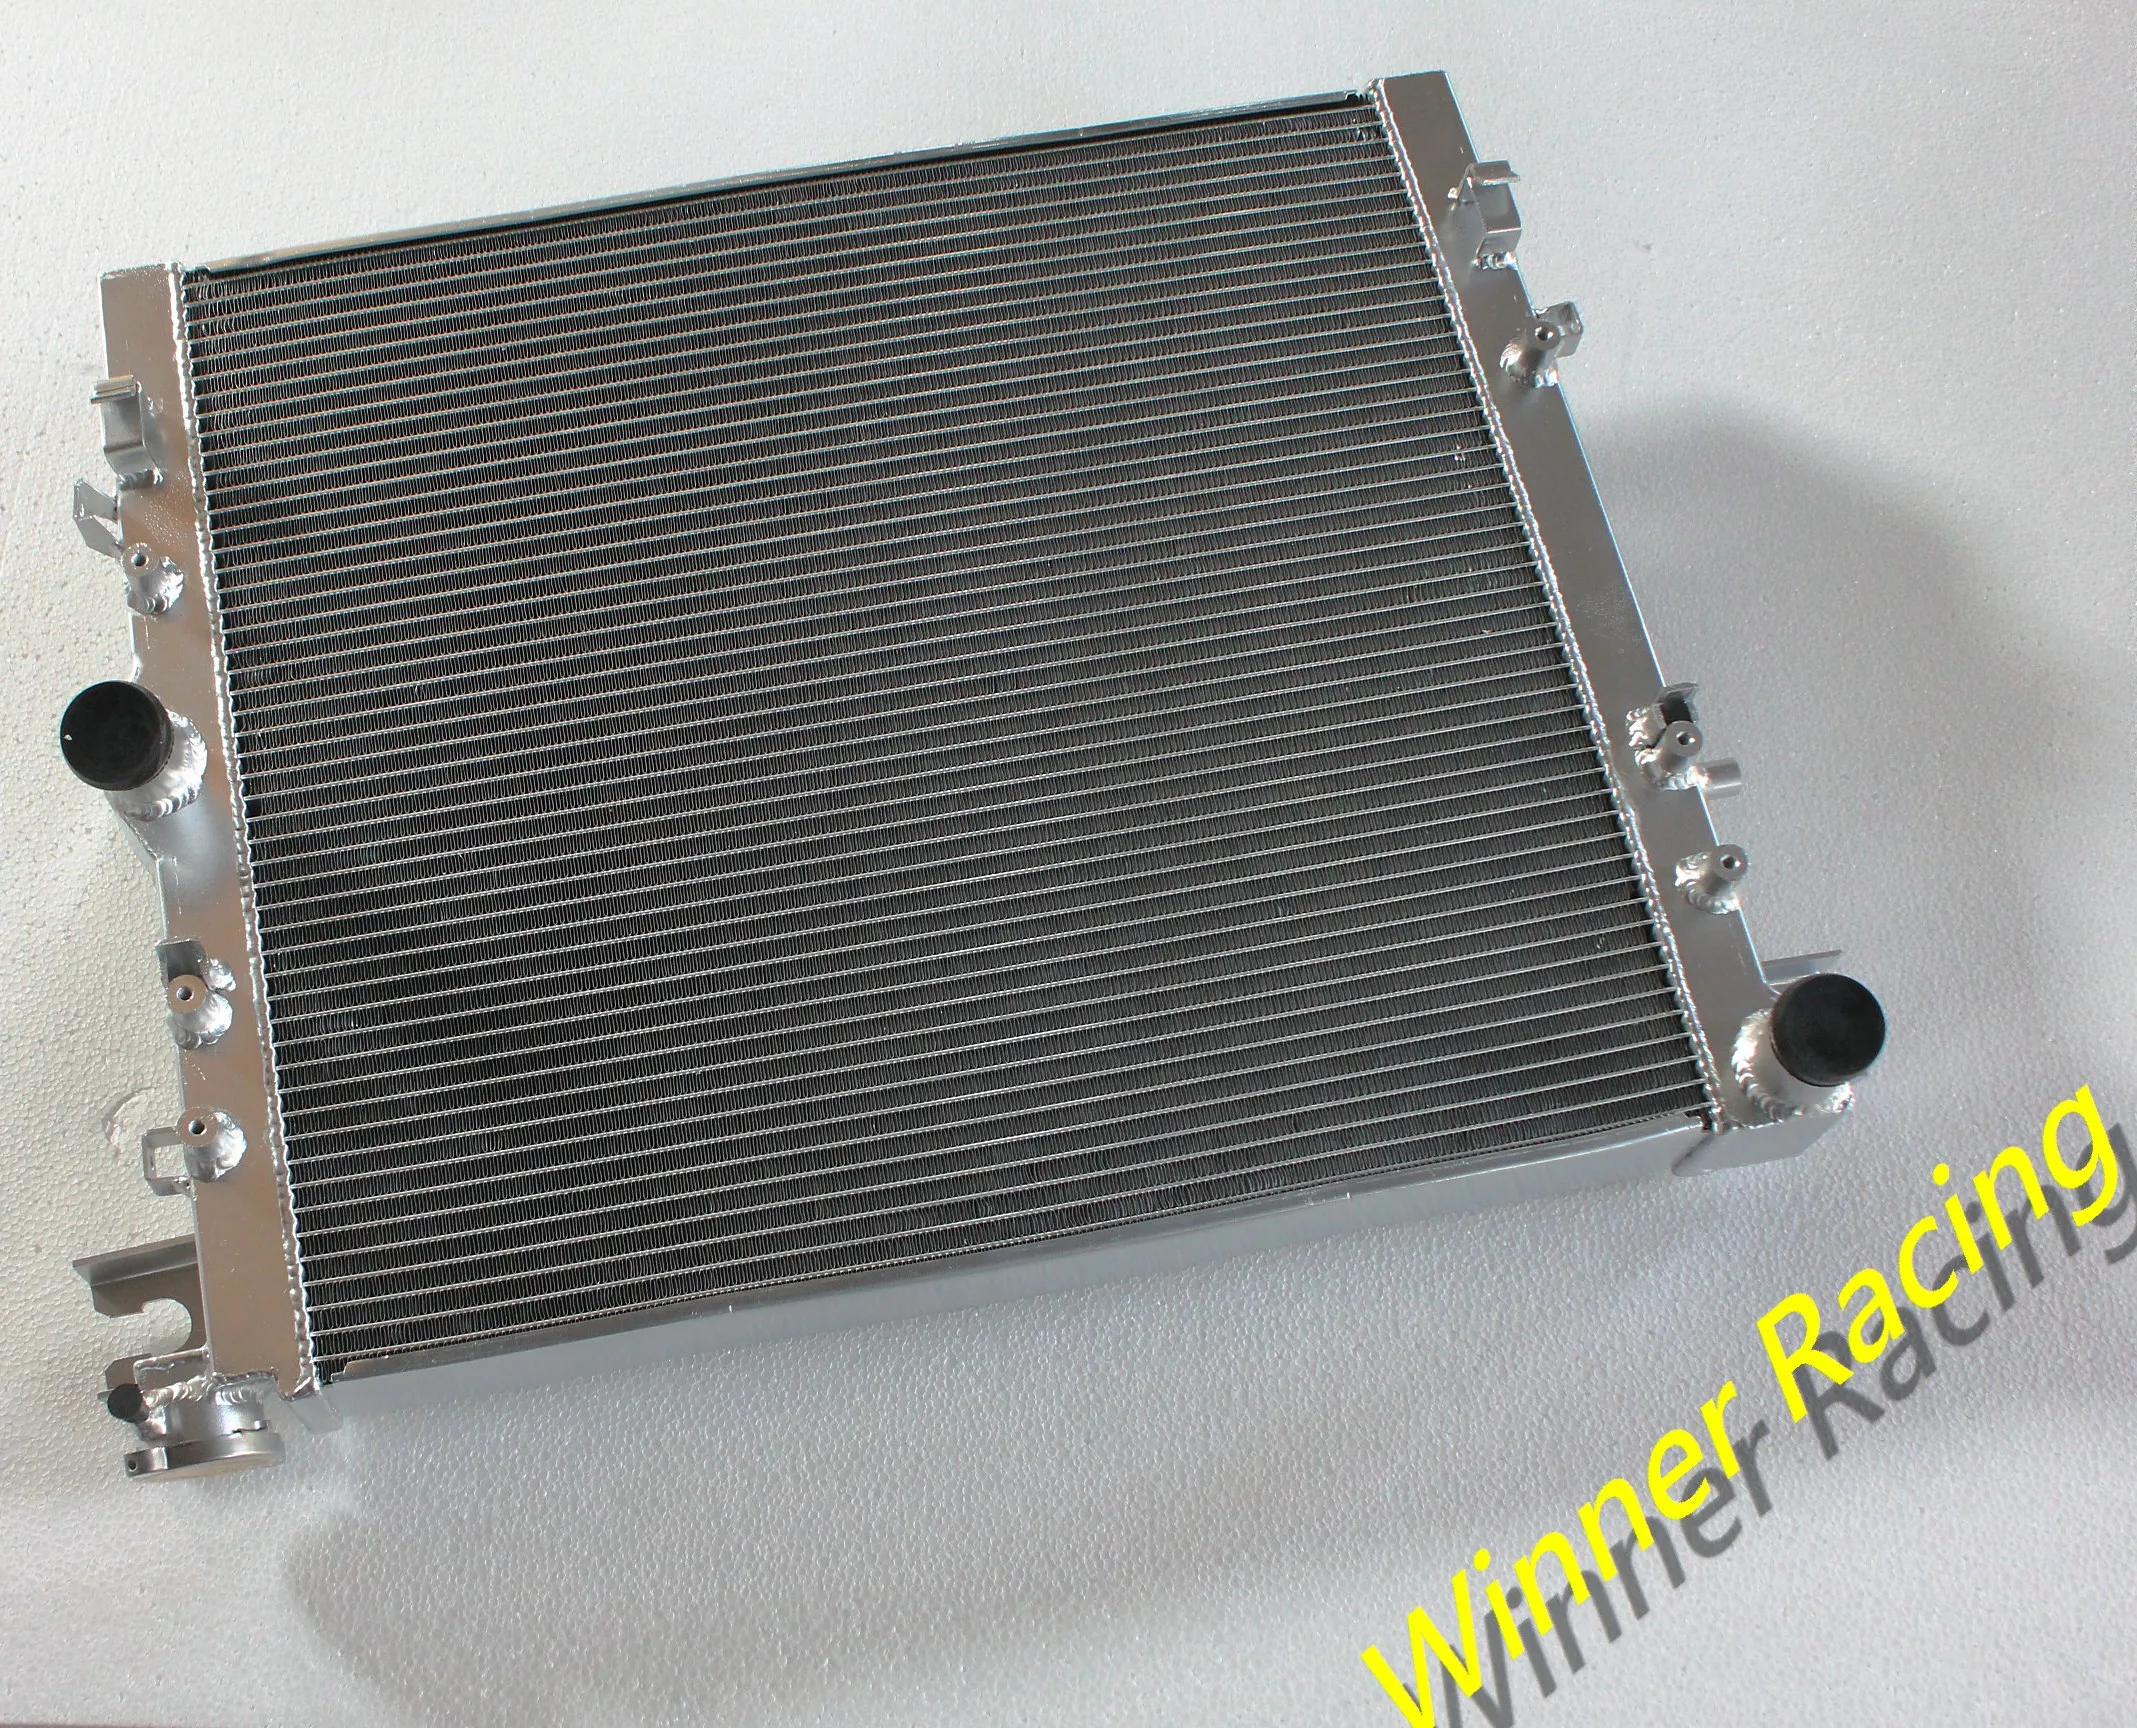 56mm Alloy Radiator Fit Jeep Wrangler Jk   2007-2018 - Buy 56mm  Alloy Radiator,Fit Jeep Wrangler Jk   Radiator,2007-2018 Radiator  Product on 